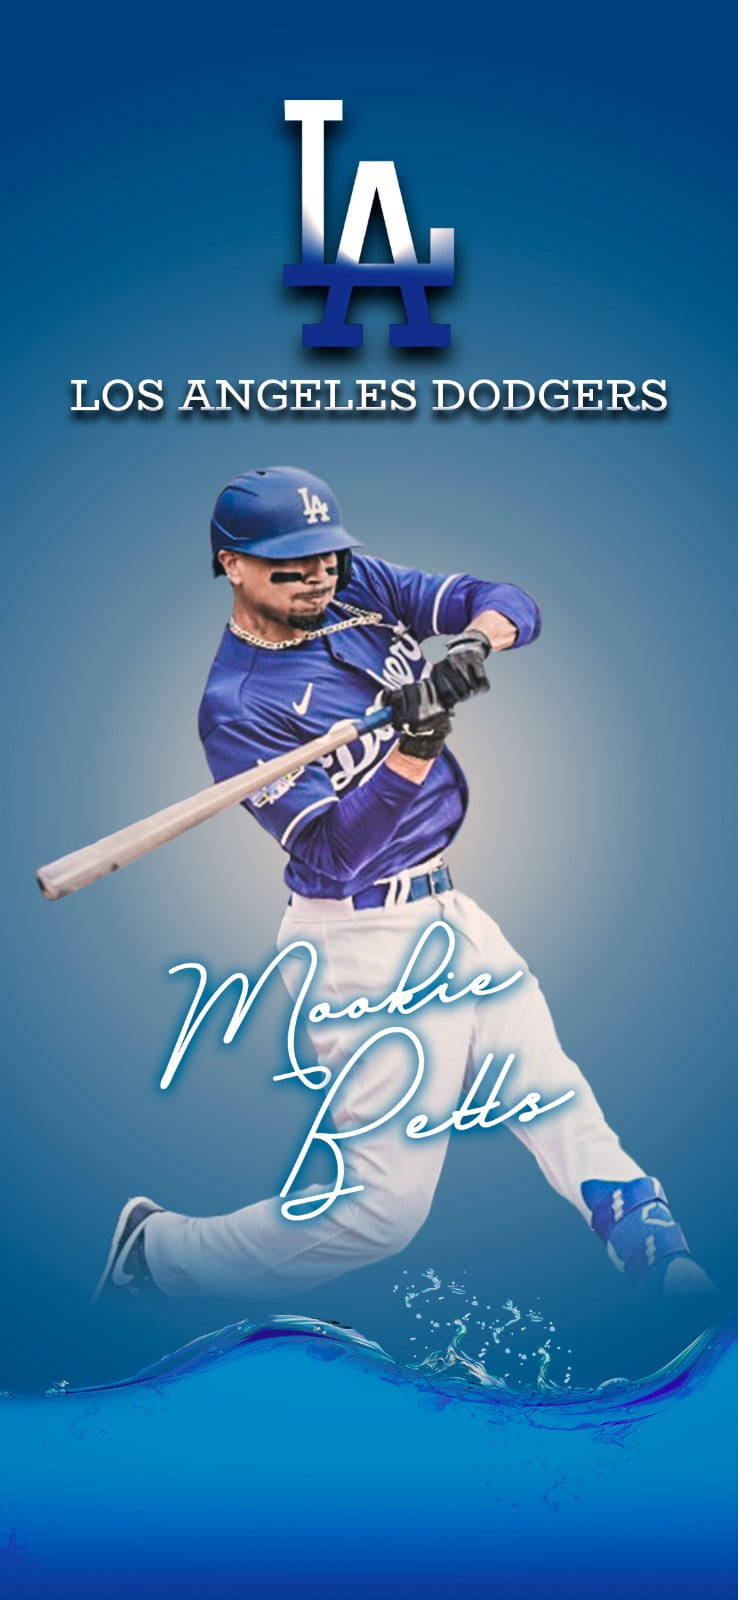 Los Angeles Dodgers Mookie Betts Background